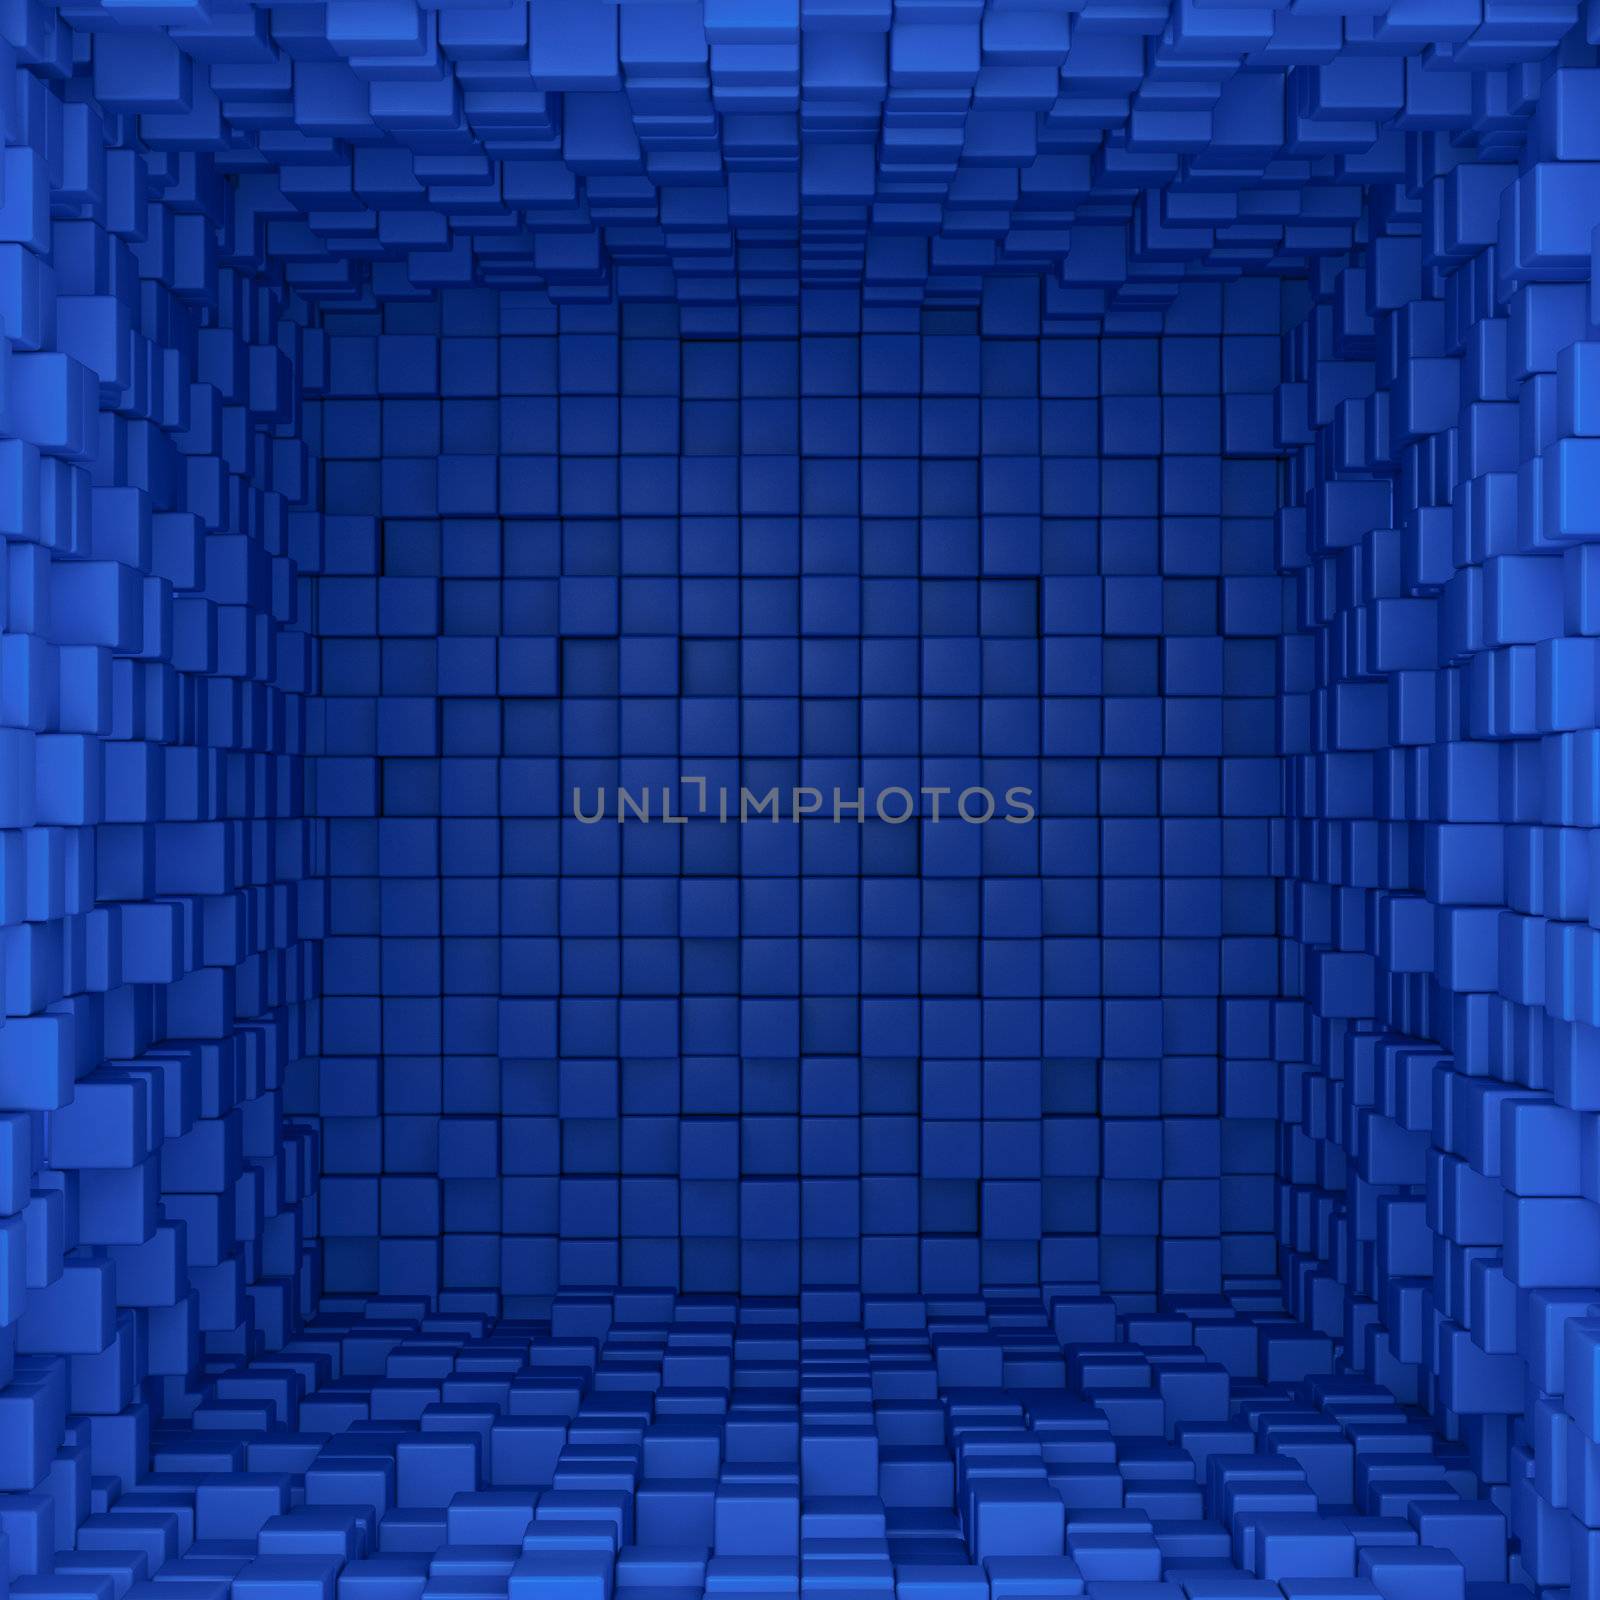 Inside of a box with blue tiled surfaces